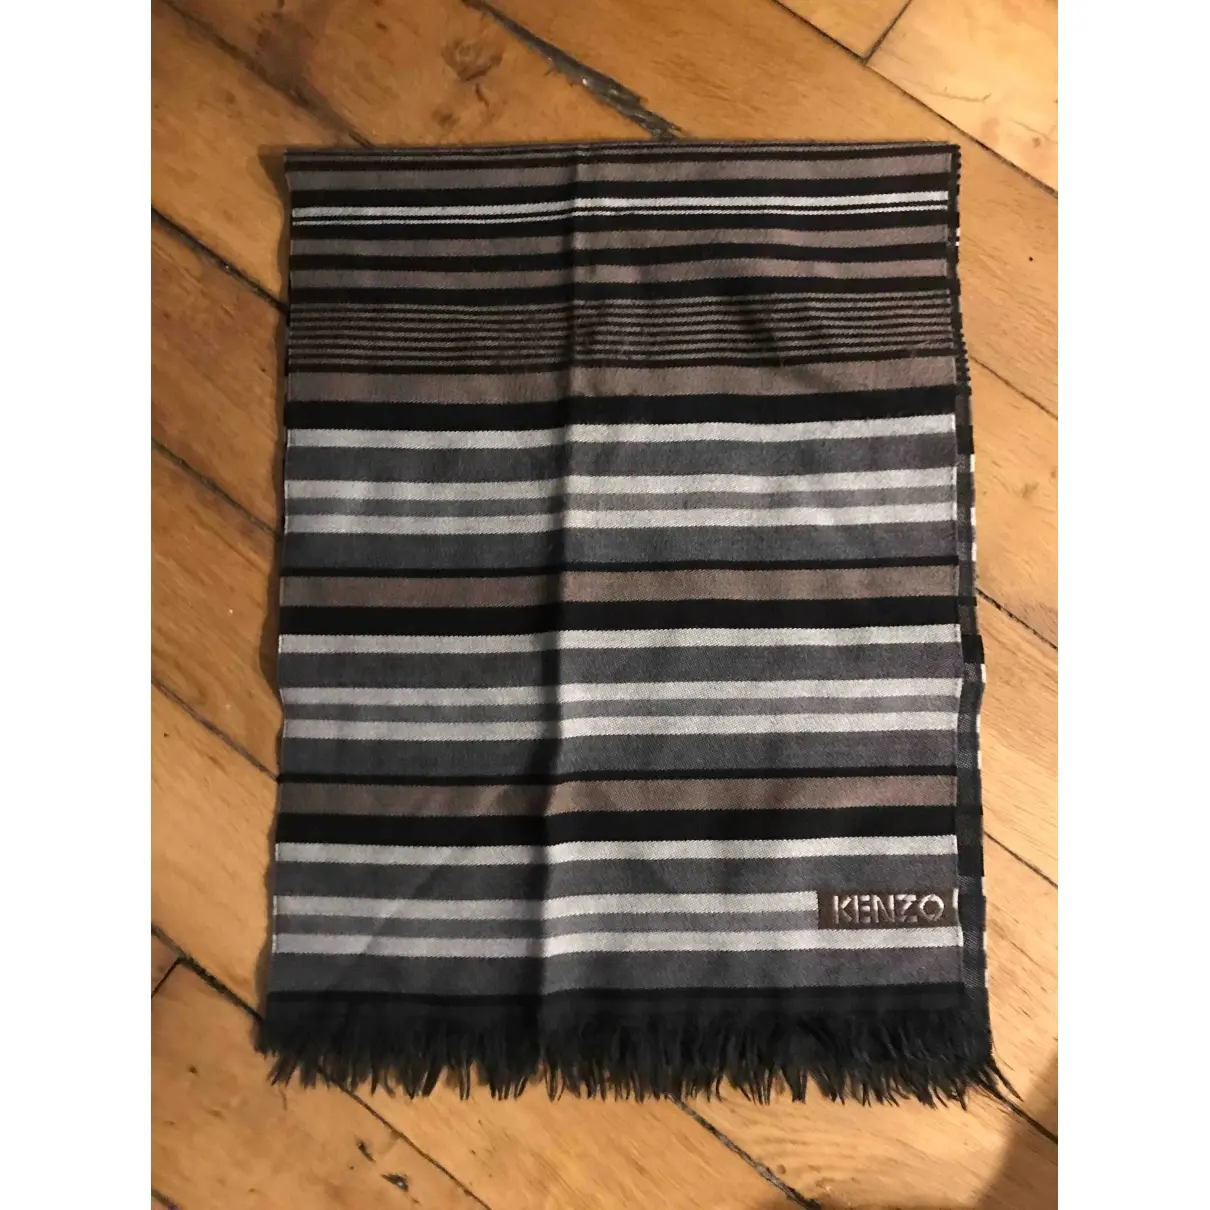 Kenzo Wool scarf & pocket square for sale